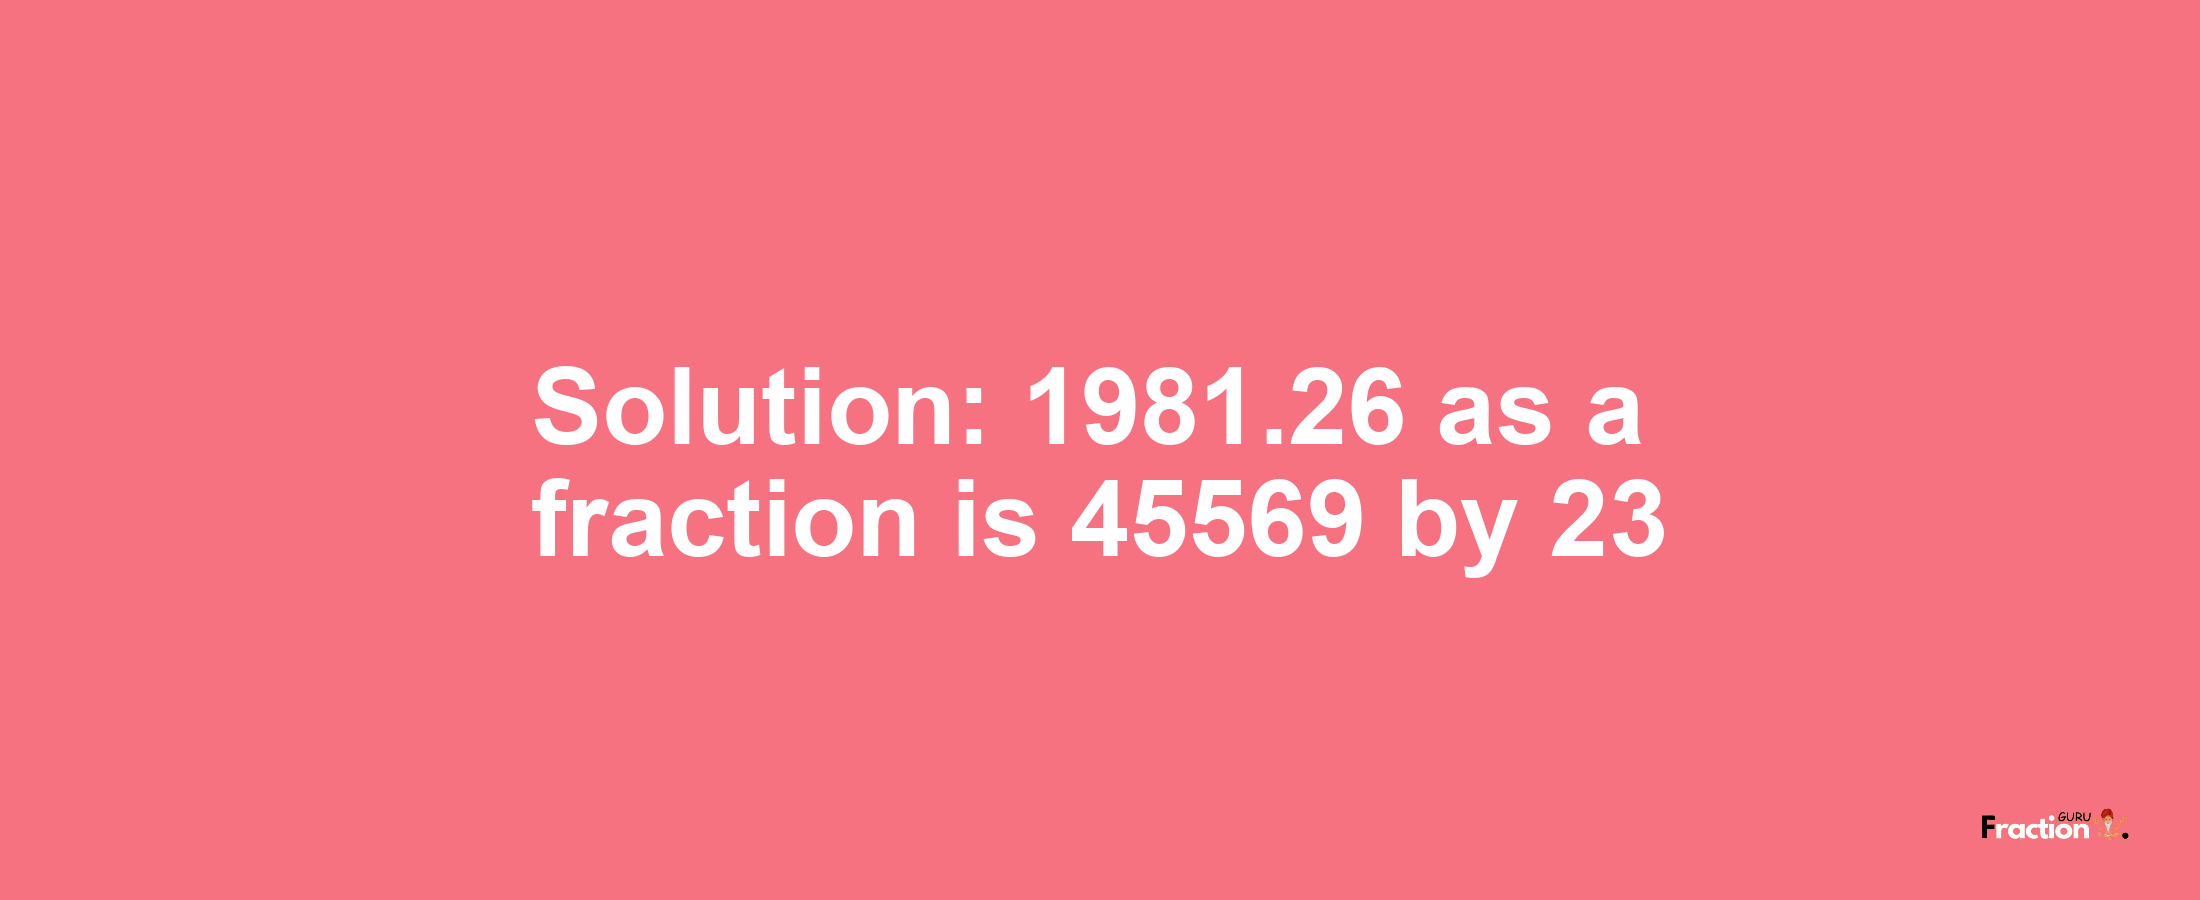 Solution:1981.26 as a fraction is 45569/23